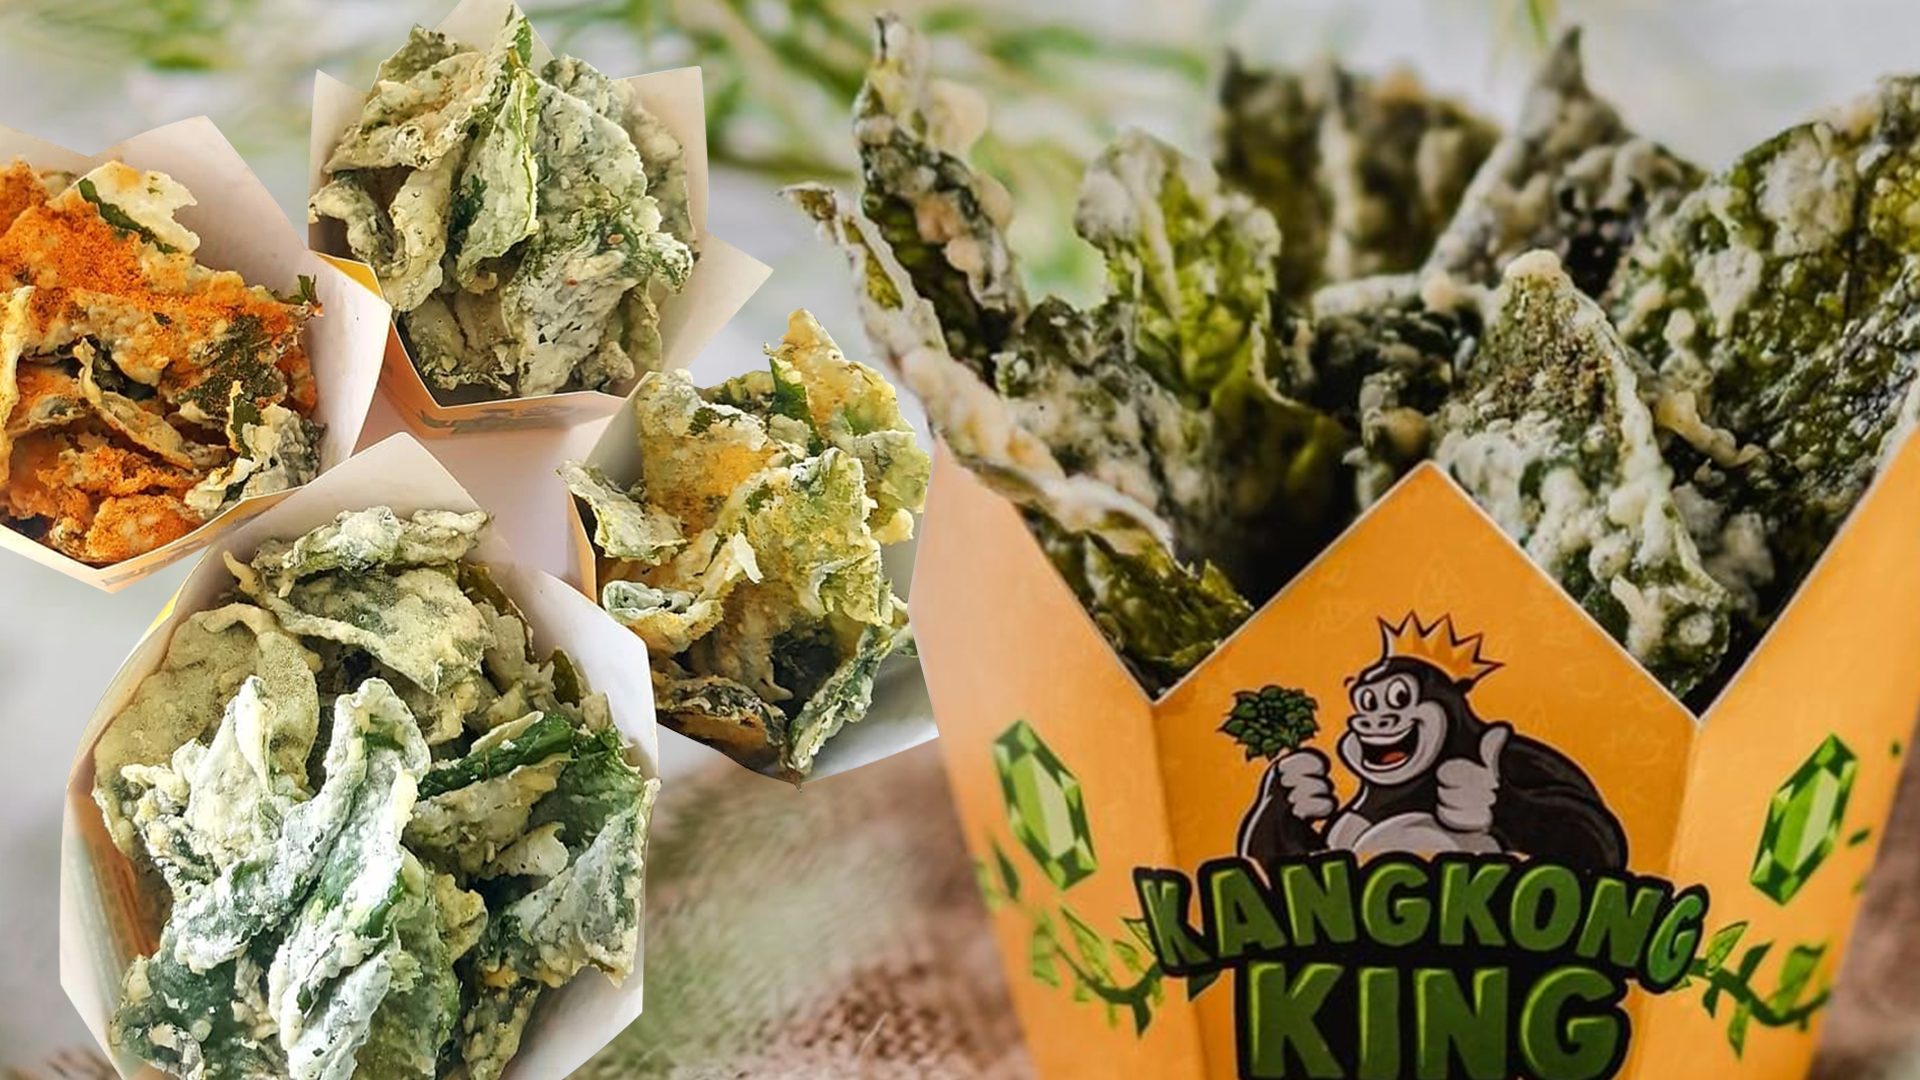 Try flavored kangkong chips from this local biz